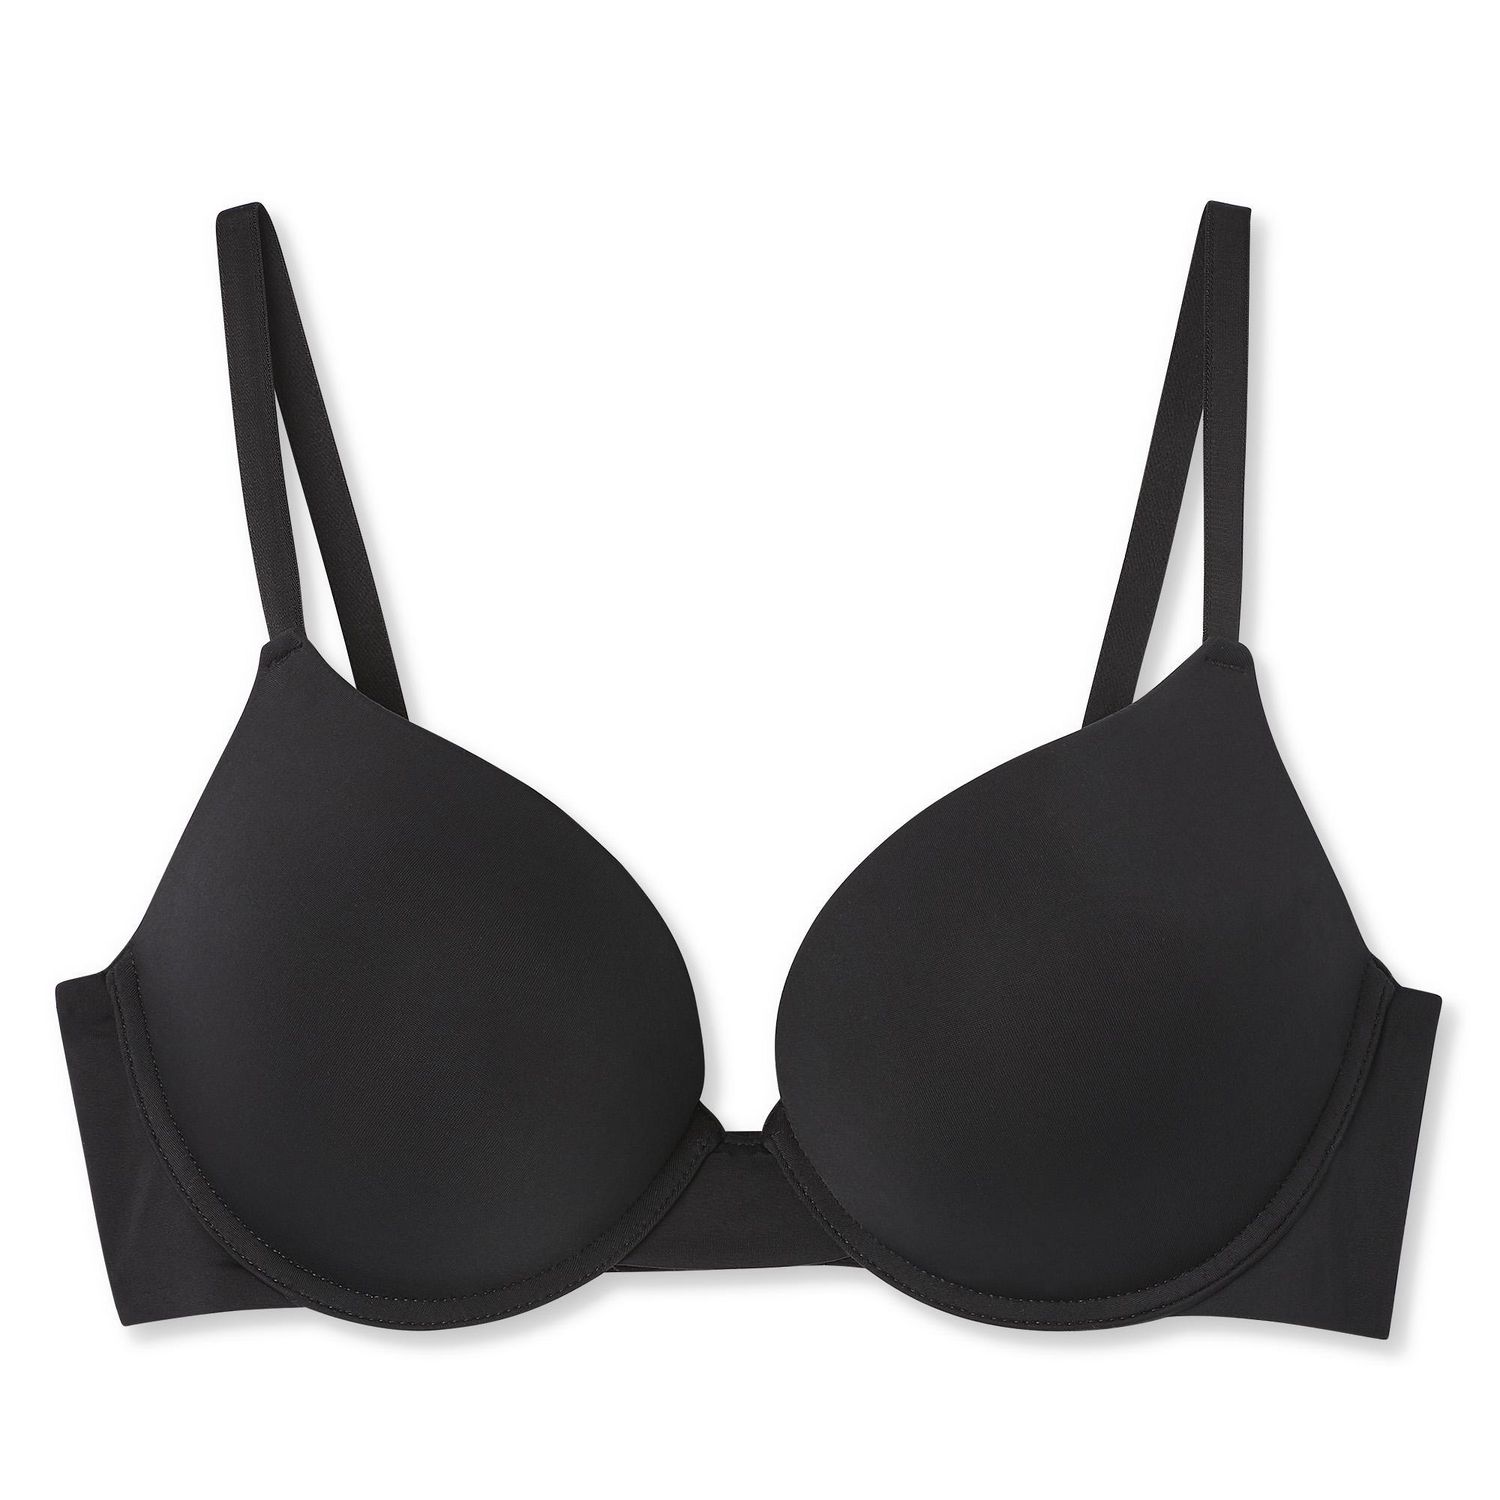 Penny Women Push-up Bra - Buy Black Penny Women Push-up Bra Online at Best  Prices in India